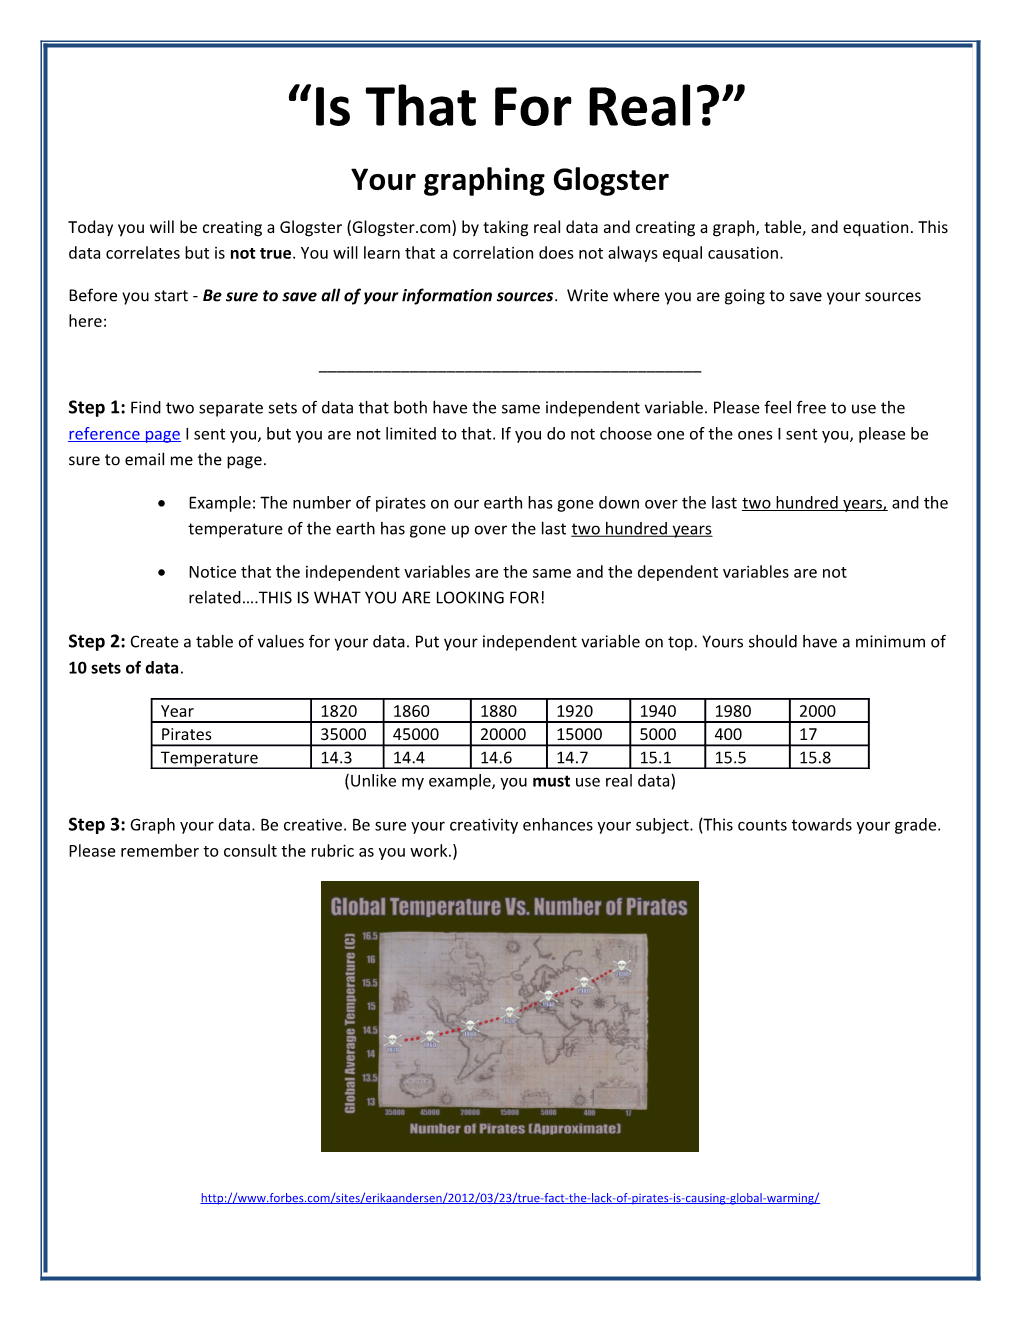 Your Graphing Glogster